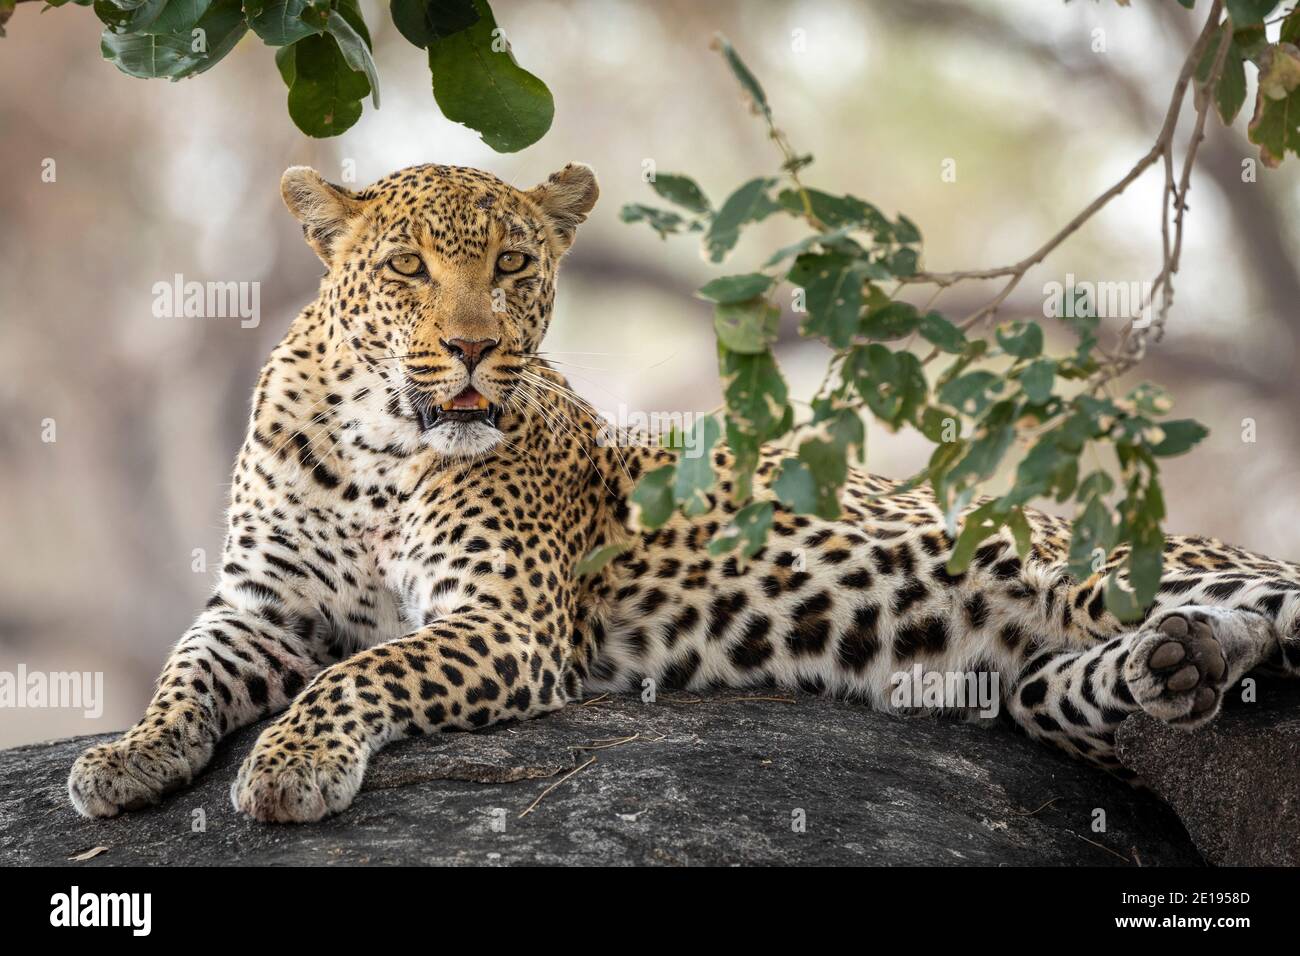 Portrait of an adult male leopard with big eyes lying on a large boulder under a tree looking alert in Kruger National Park in South Africa Stock Photo